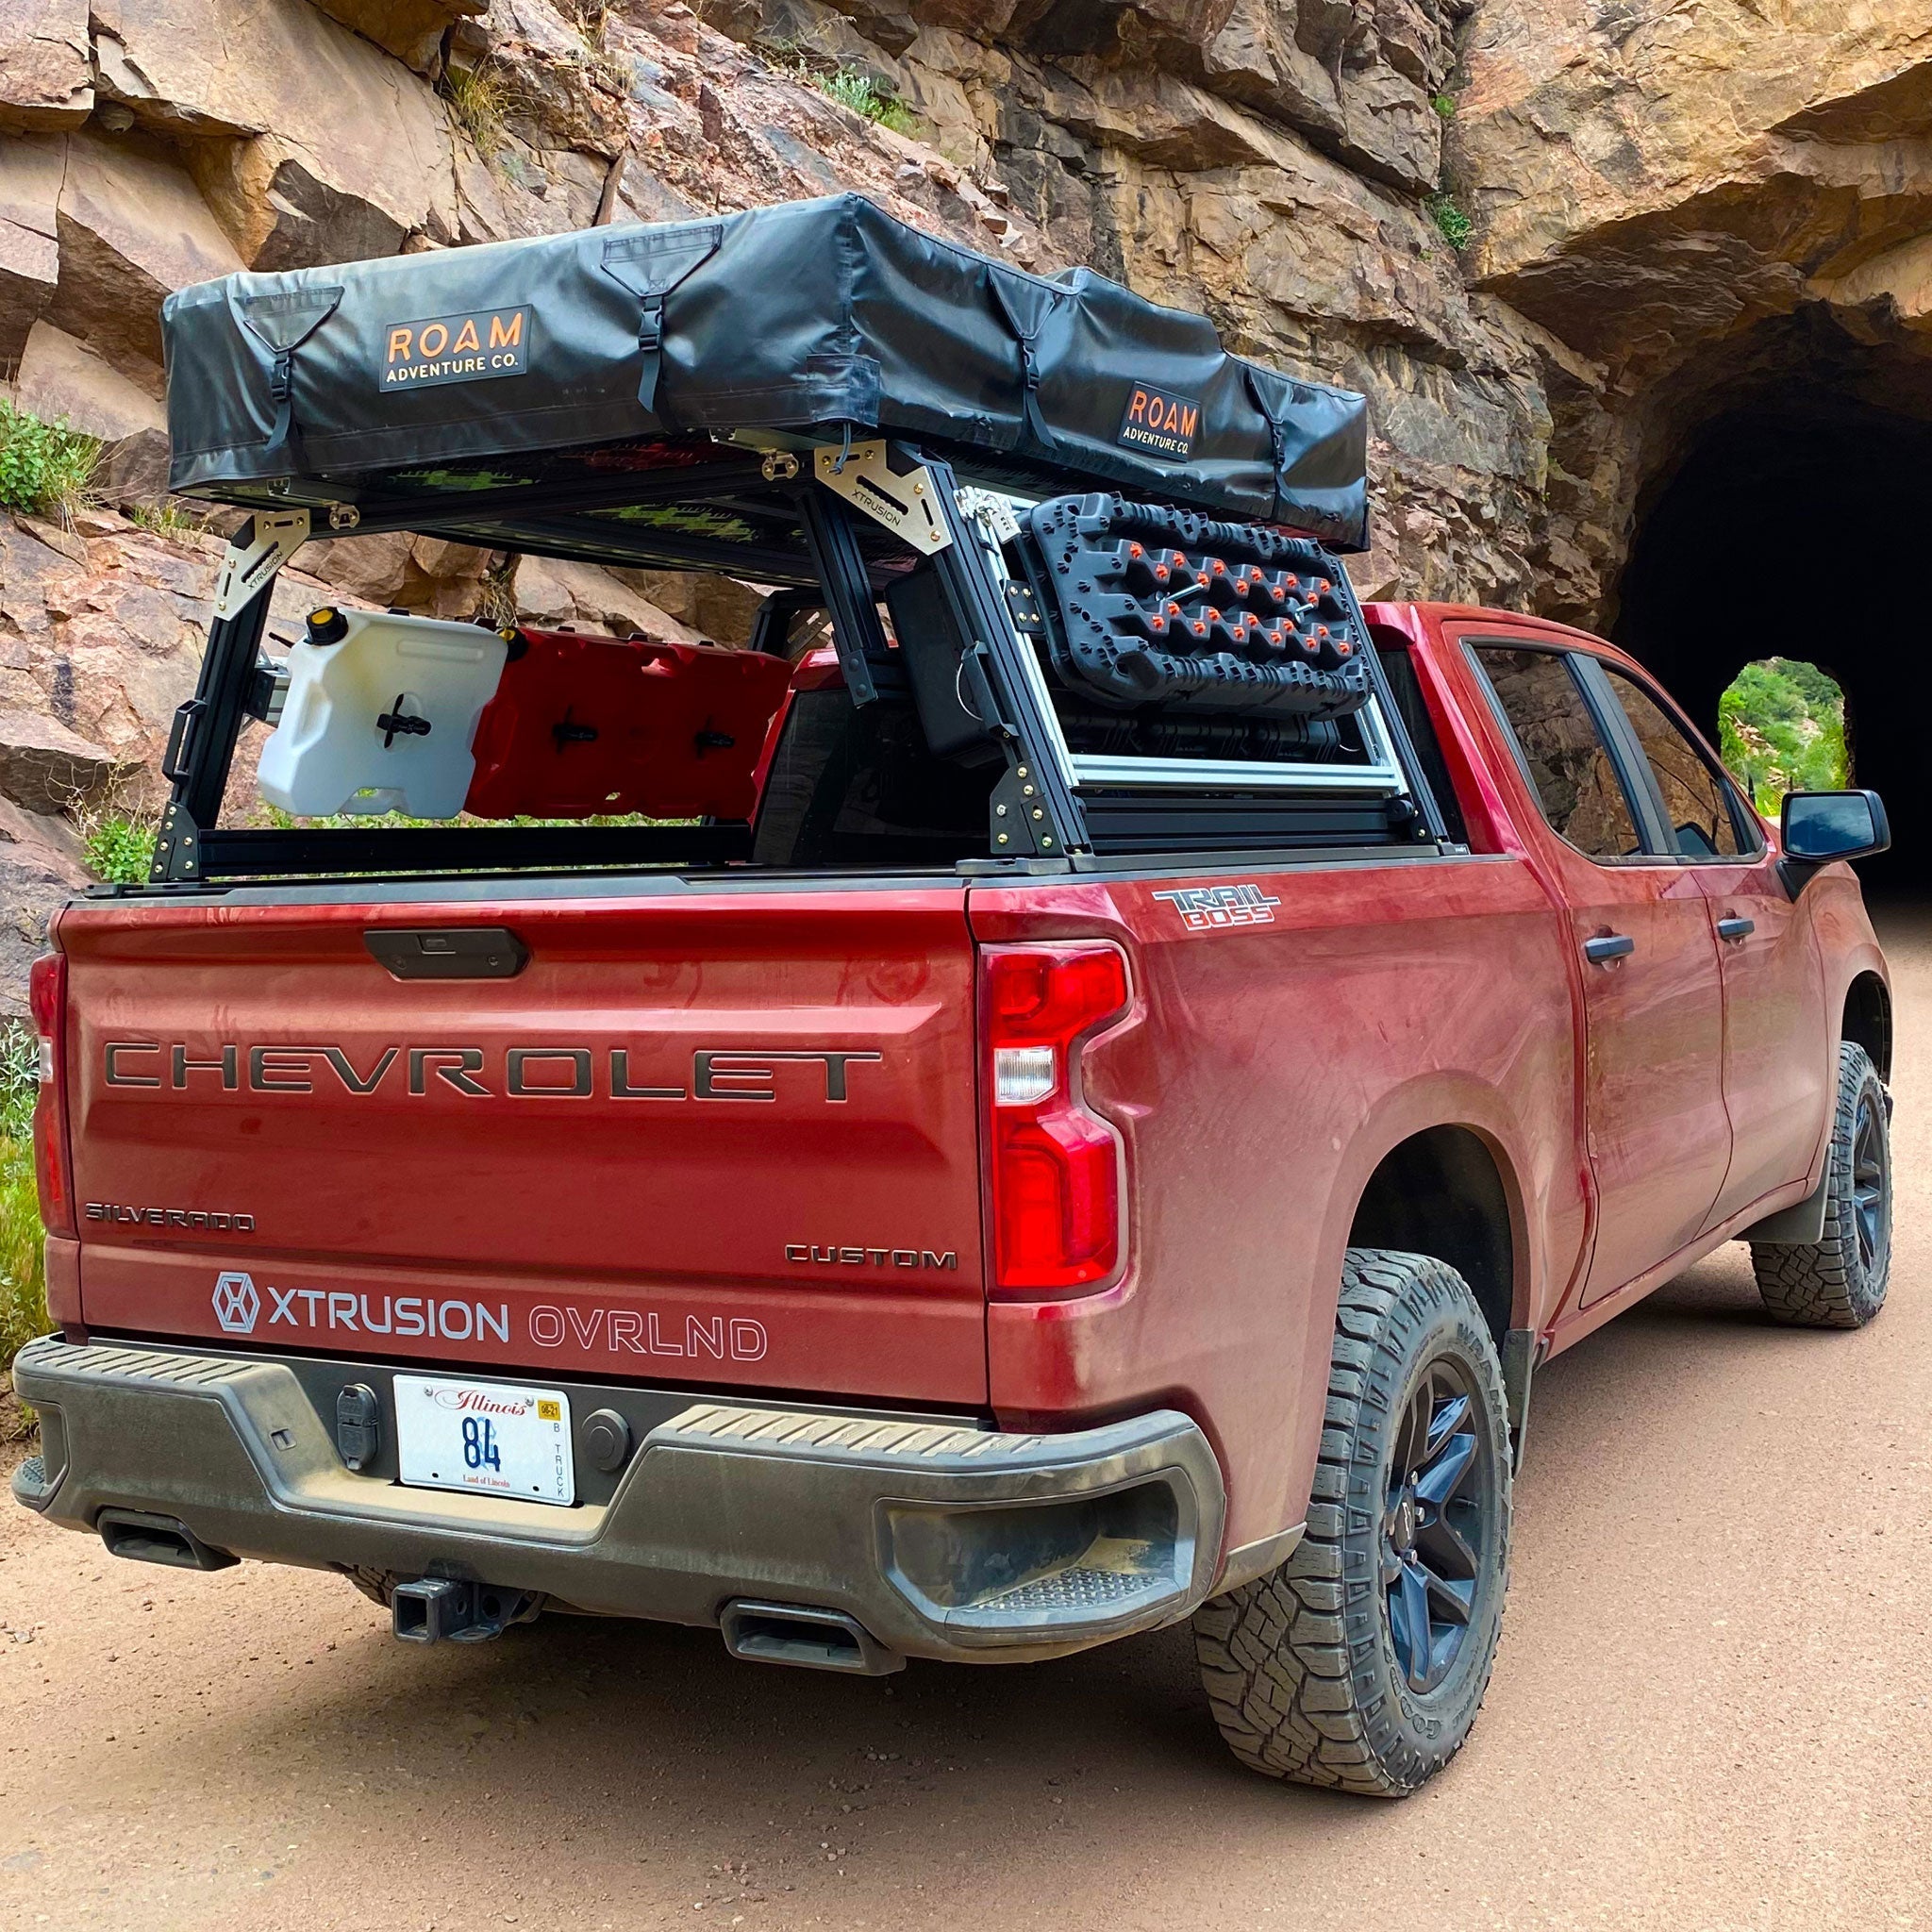 Chevrolet Silverado Extrusion Overland Bed Rack with traction boards, Rotopax, mountain bike, and roof top tent.